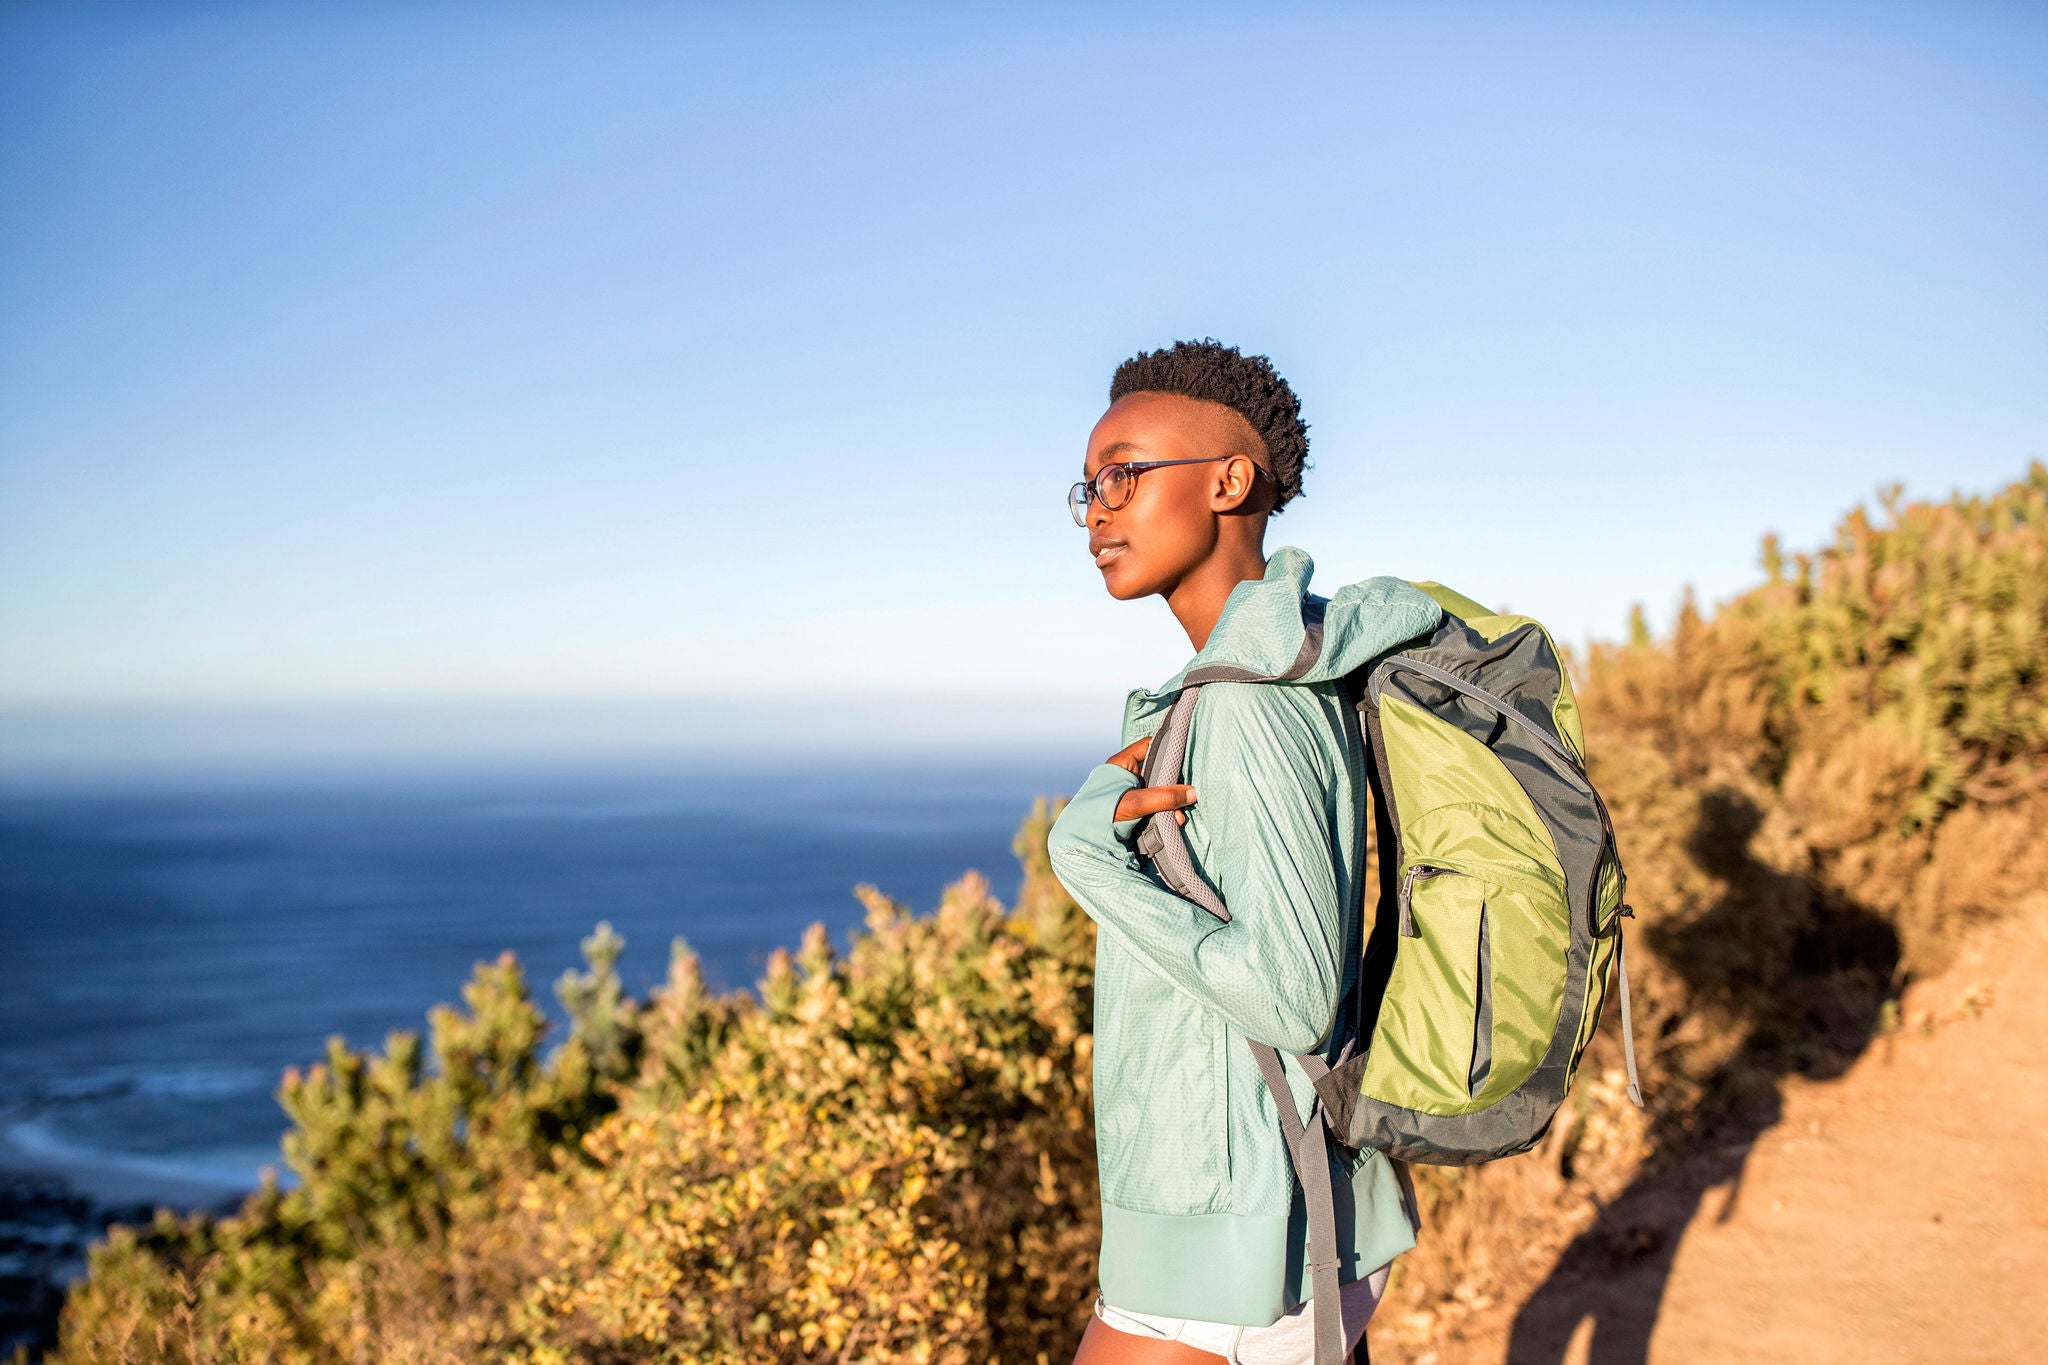 EY Young woman on a hiking trip at the coast looking at view